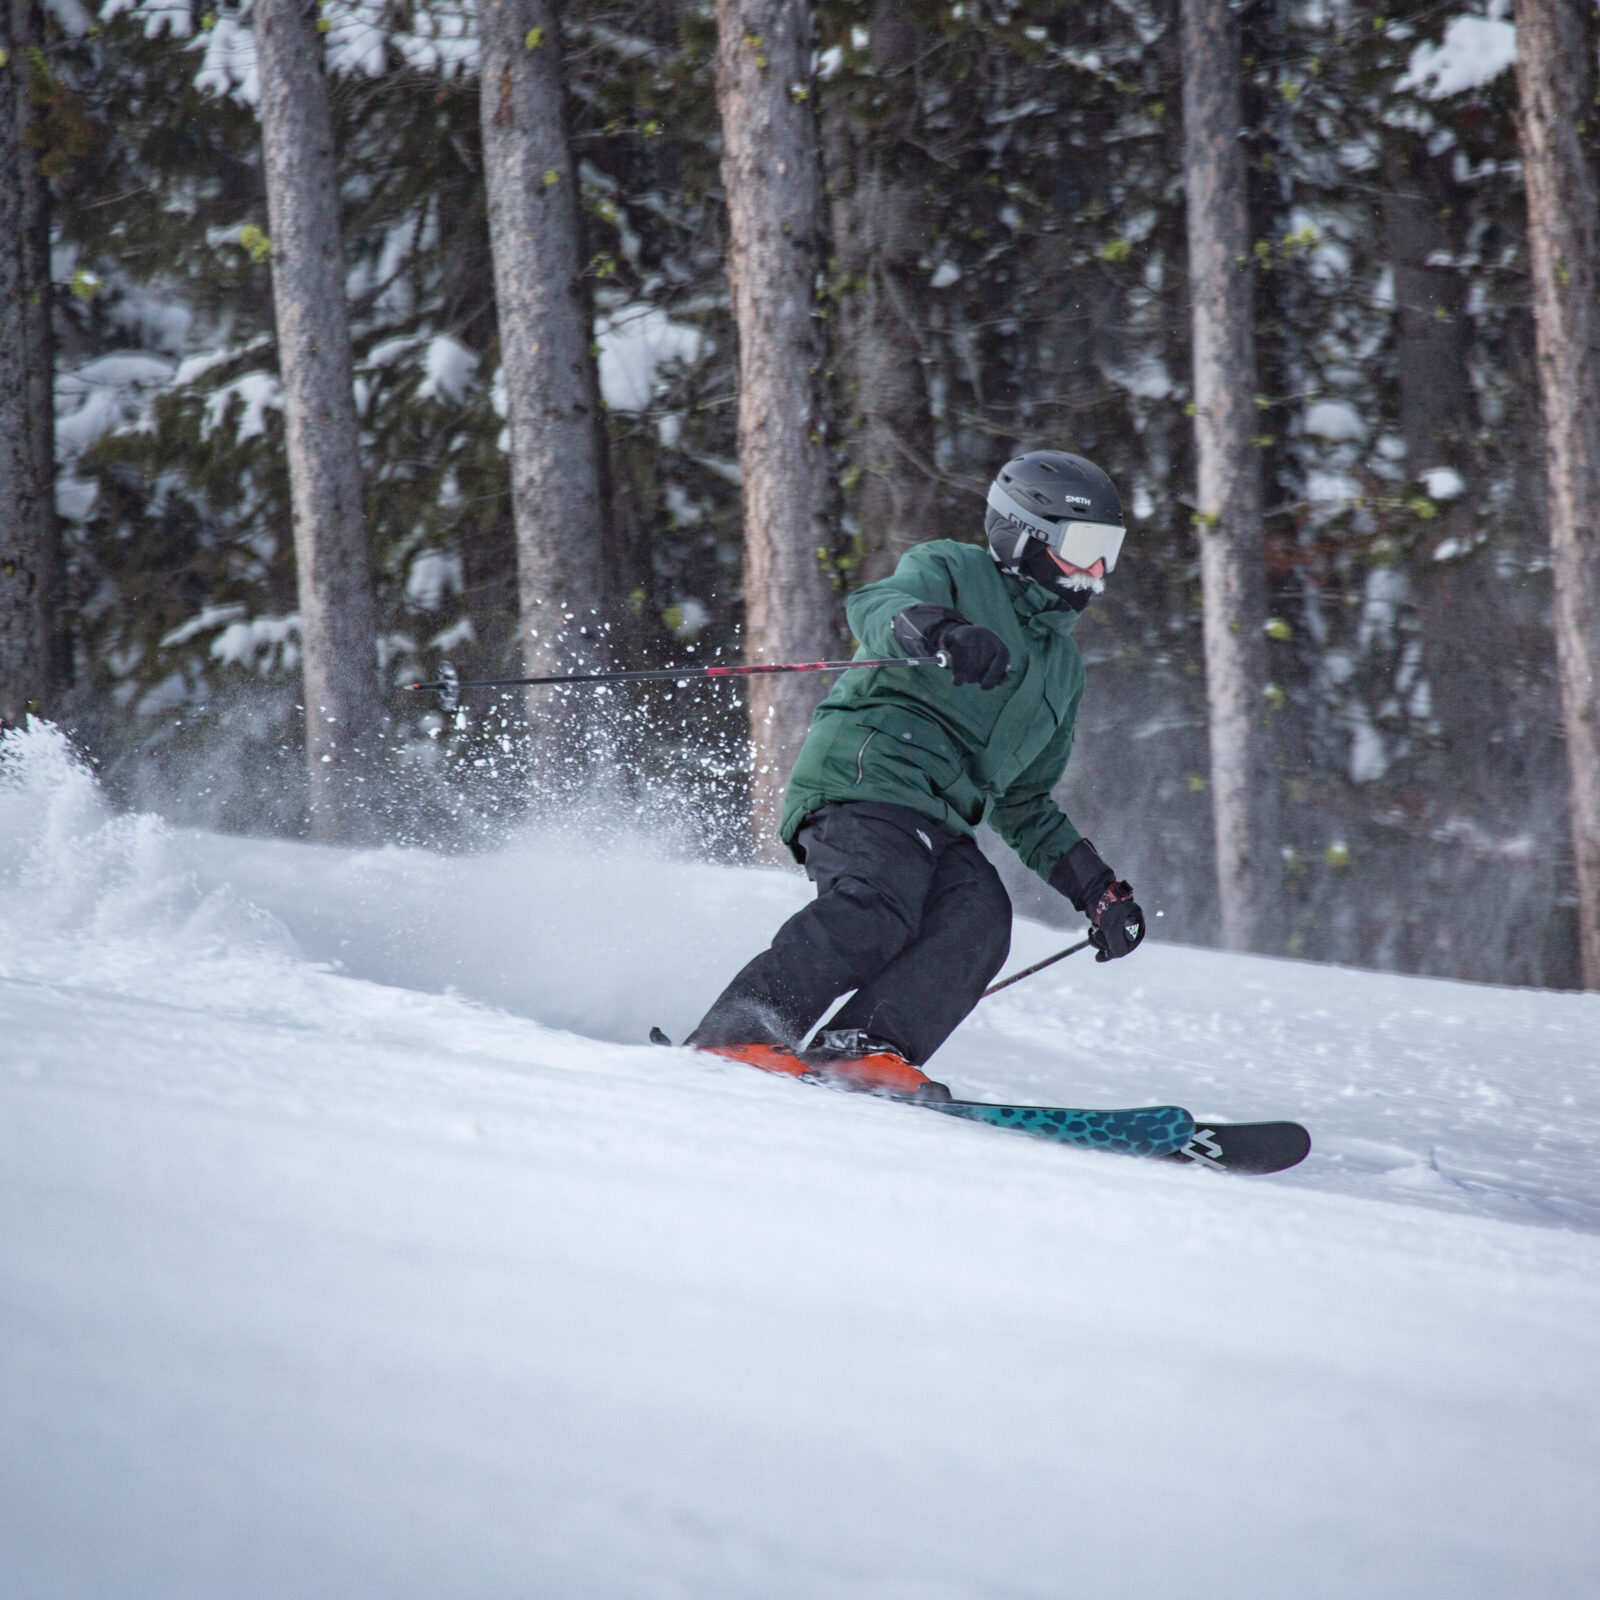 Skier in green and black carving under chair 3